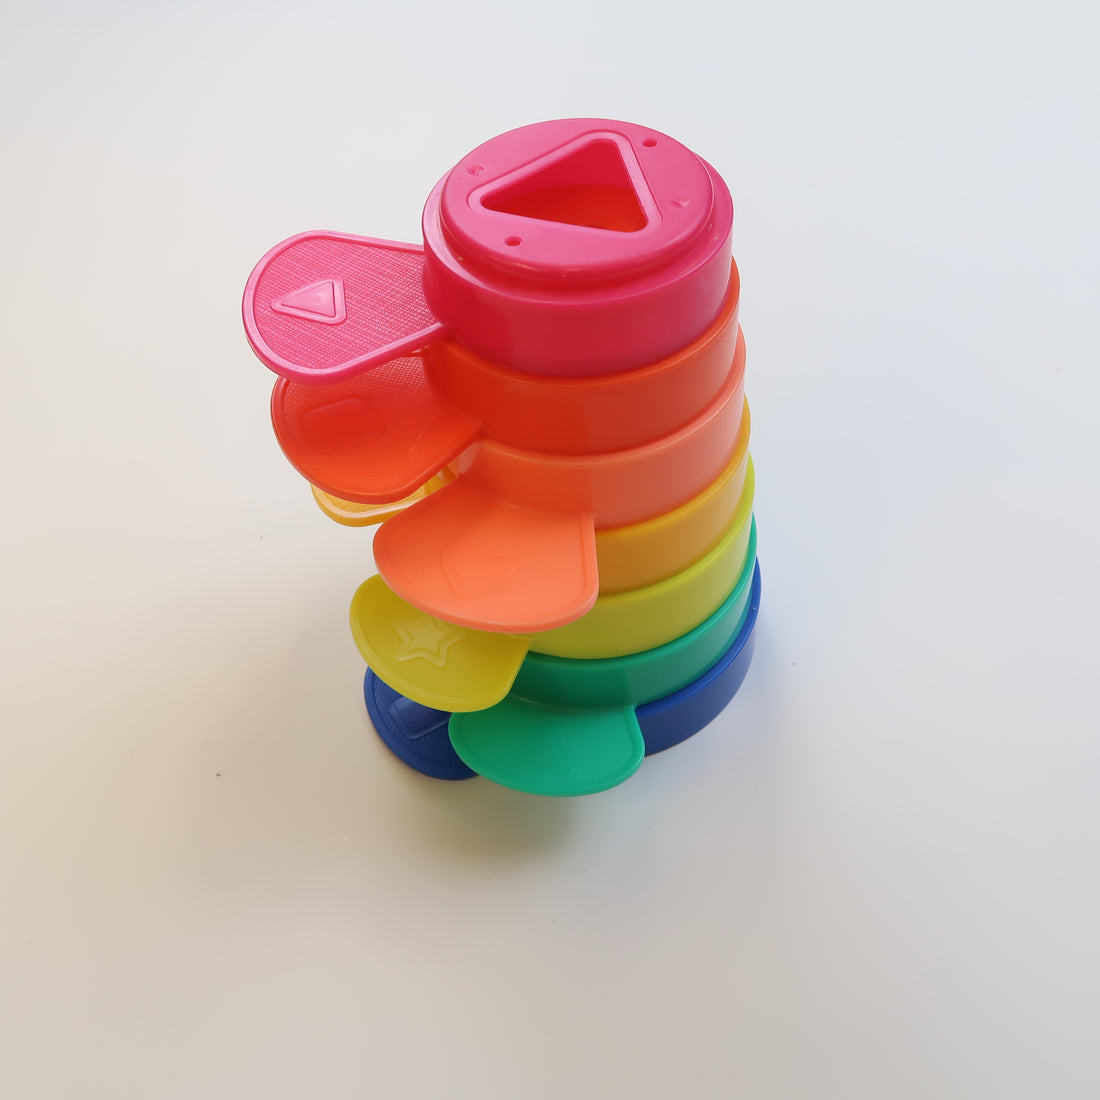 Unknown Brand - Plastic Stacking Cups with Shapes